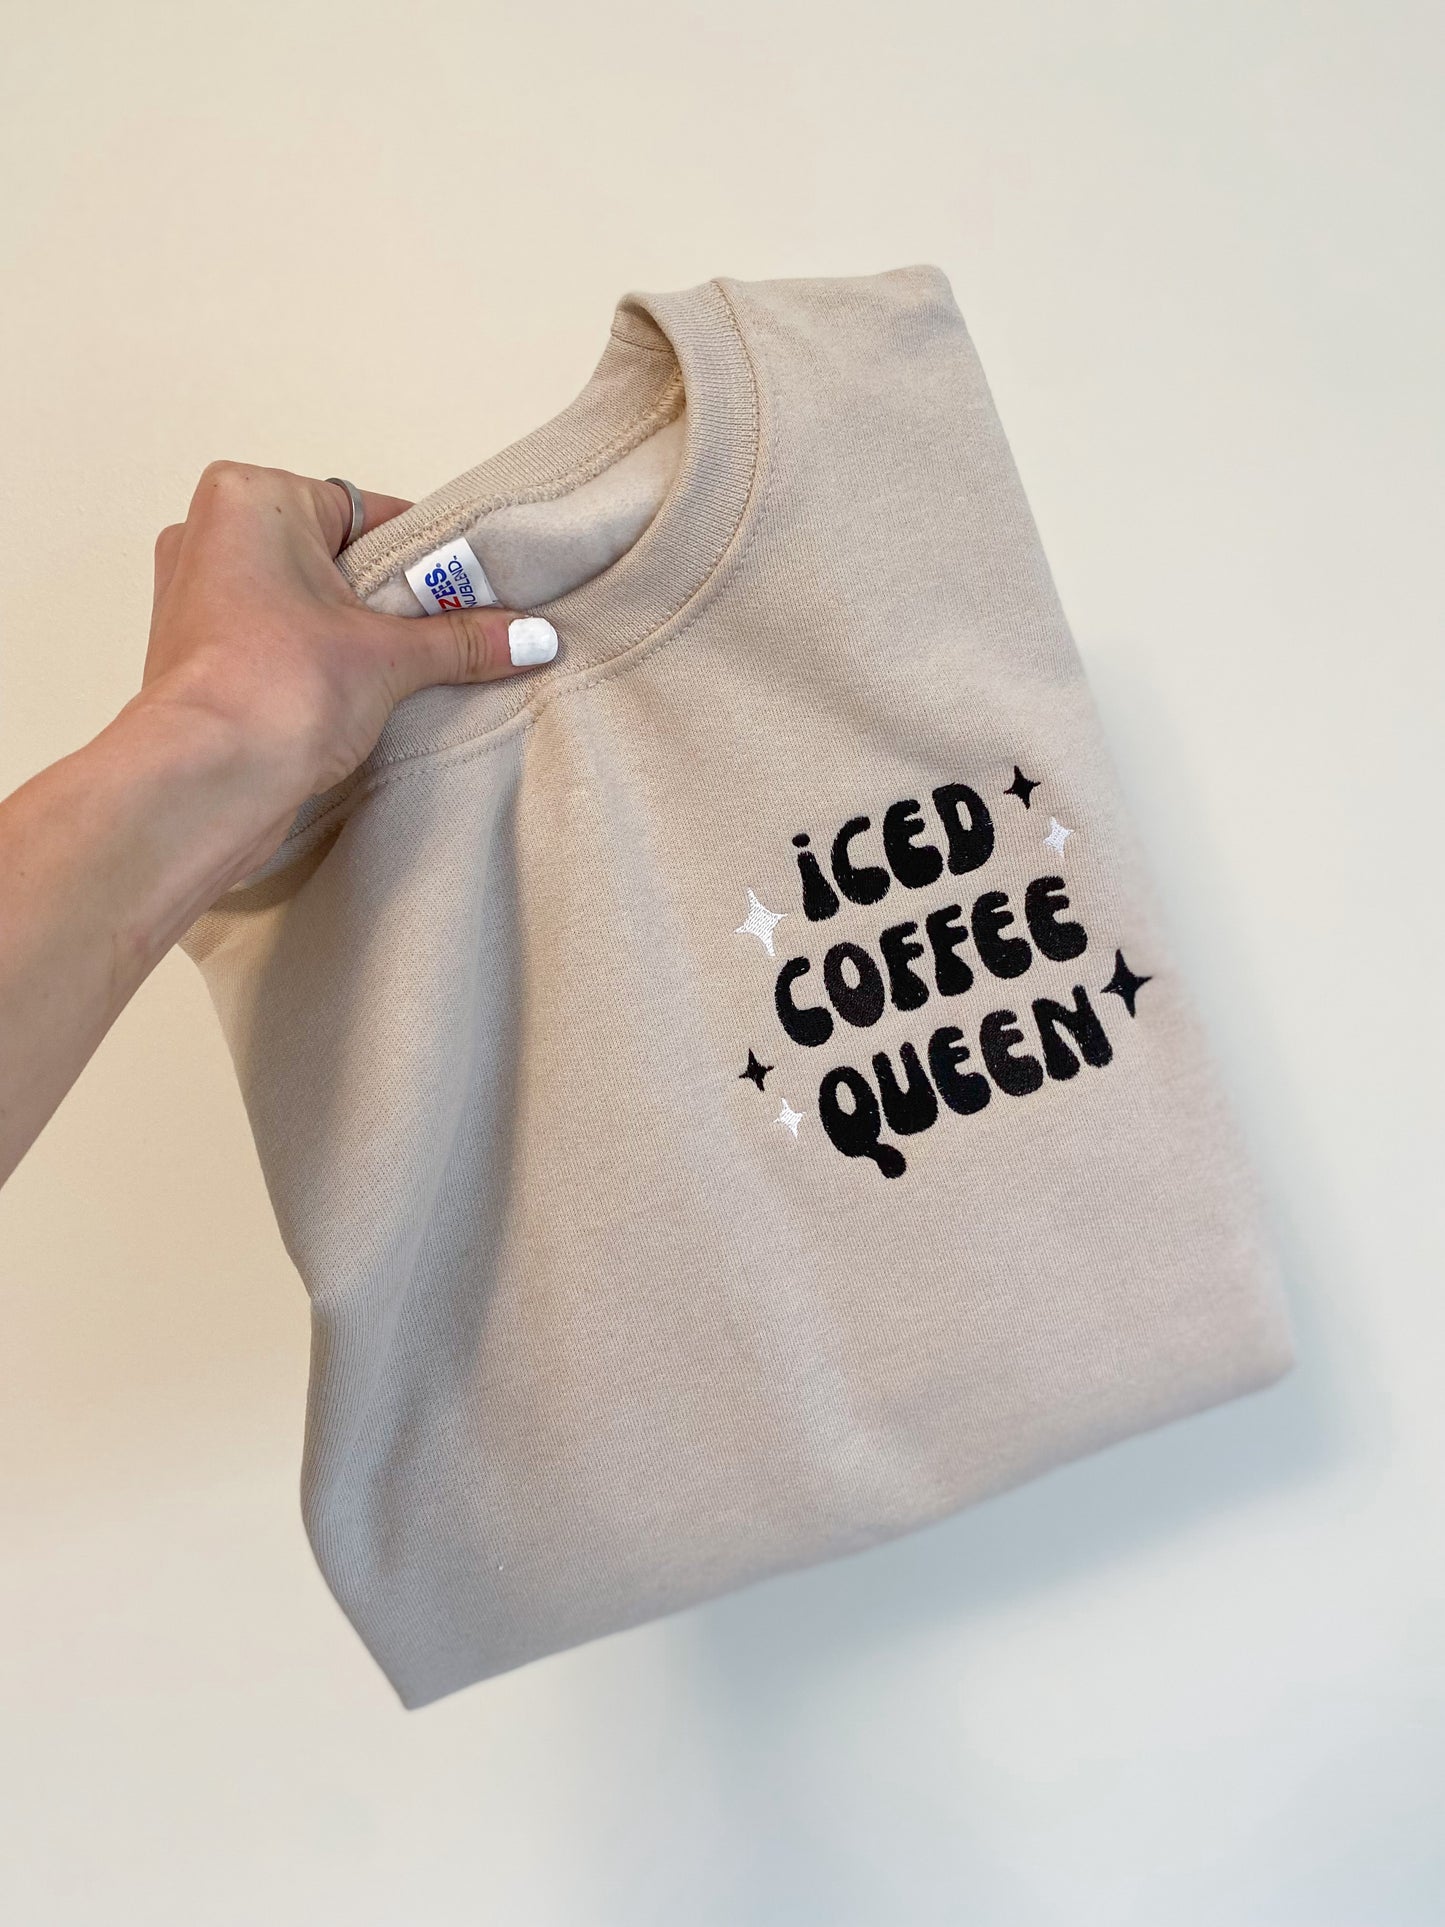 Iced Coffee Queen Sweatshirt -- Embroidered, Customize Yours!